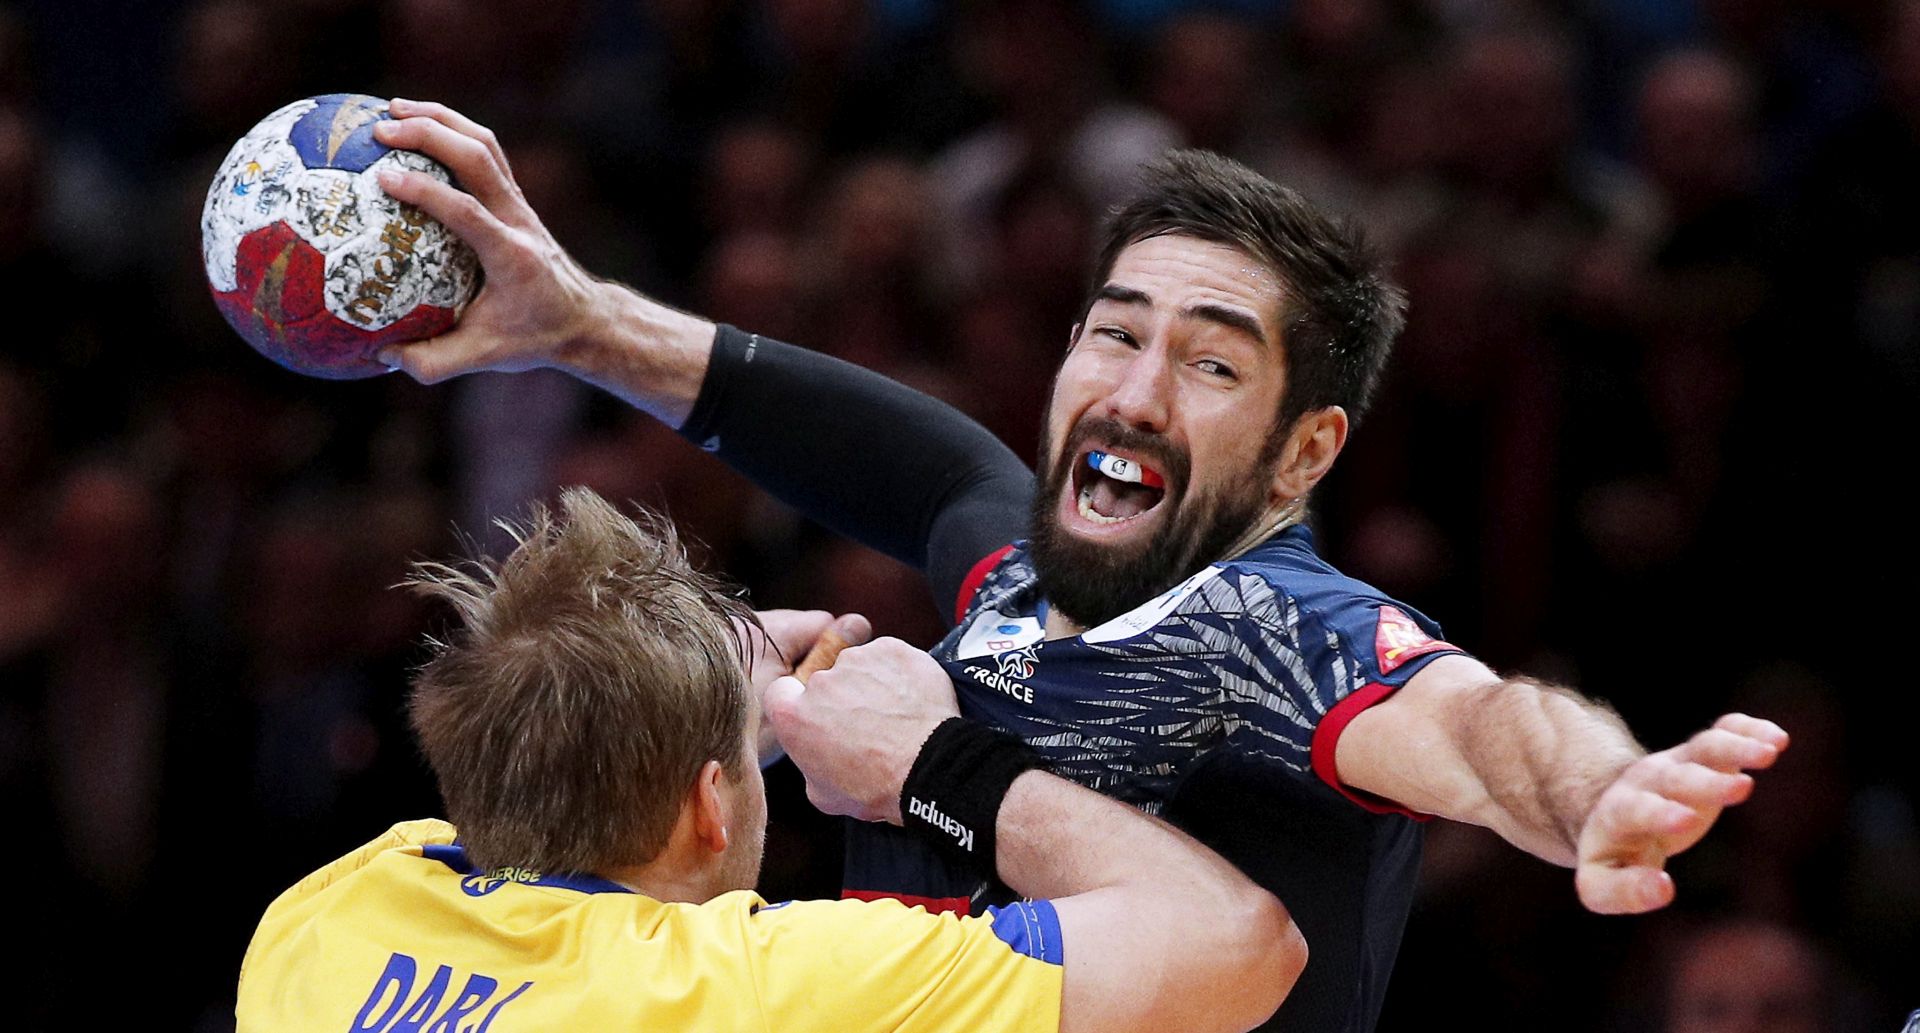 epa05747453 France's Nikola Karabatic (R) in action during the quarter final match between France and Sweden at the IHF Men's Handball World Championship at Pierre Mauroy stadium in Villeneuve d'Ascq, near Lille, France, 24 January 2017. France won 33-30.  EPA/YOAN VALAT